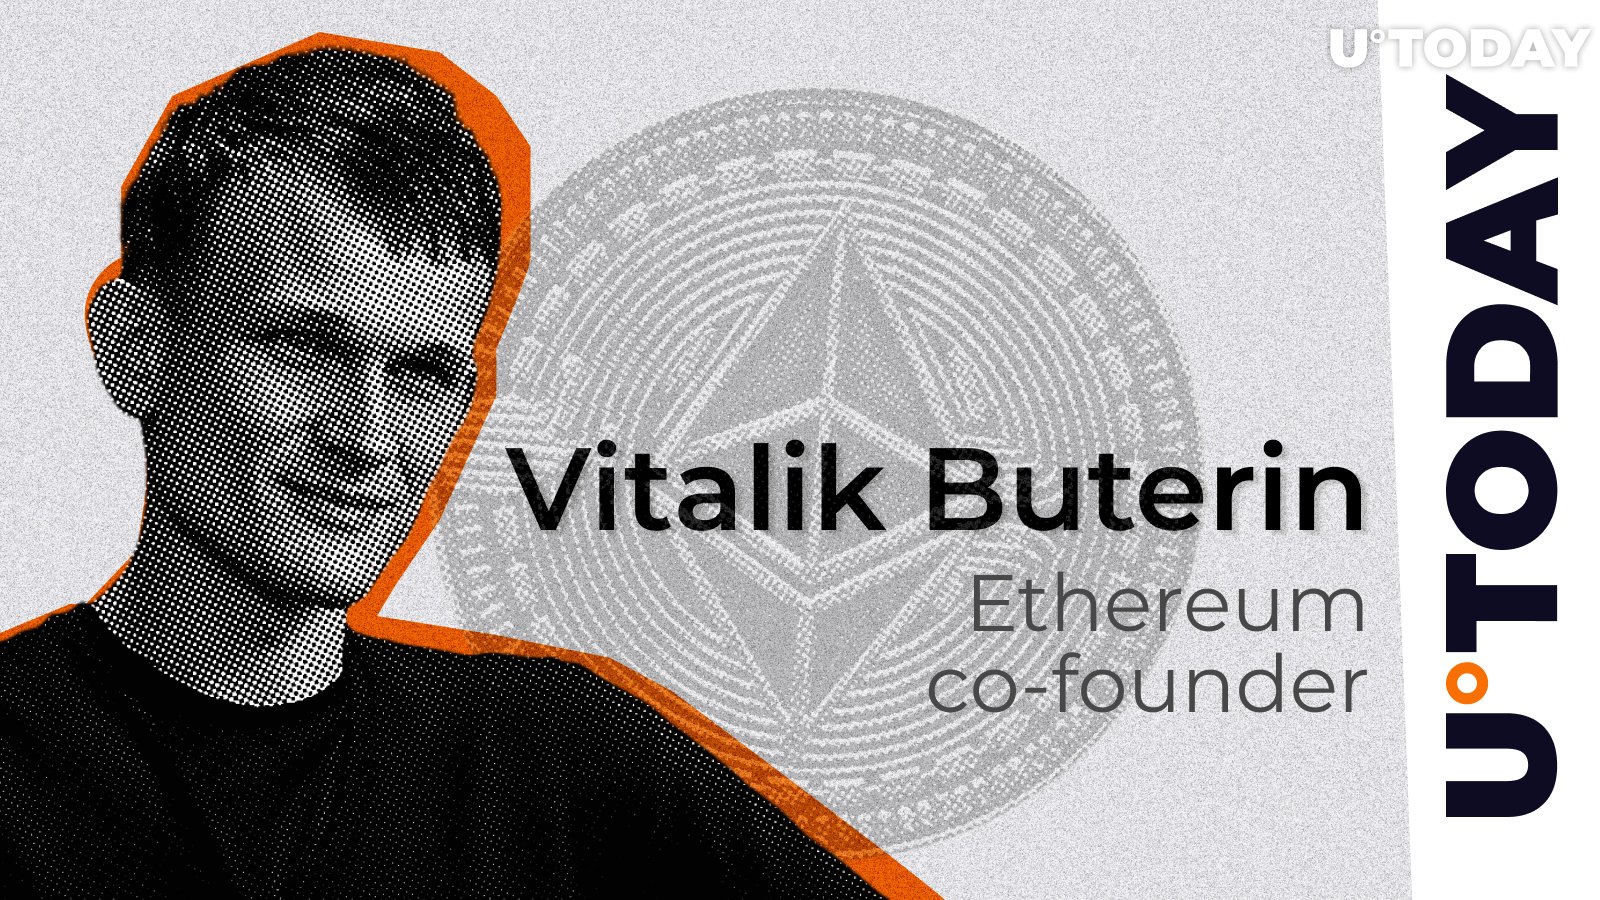 Vitalik Buterin Suprised by This New Ethereum Graph